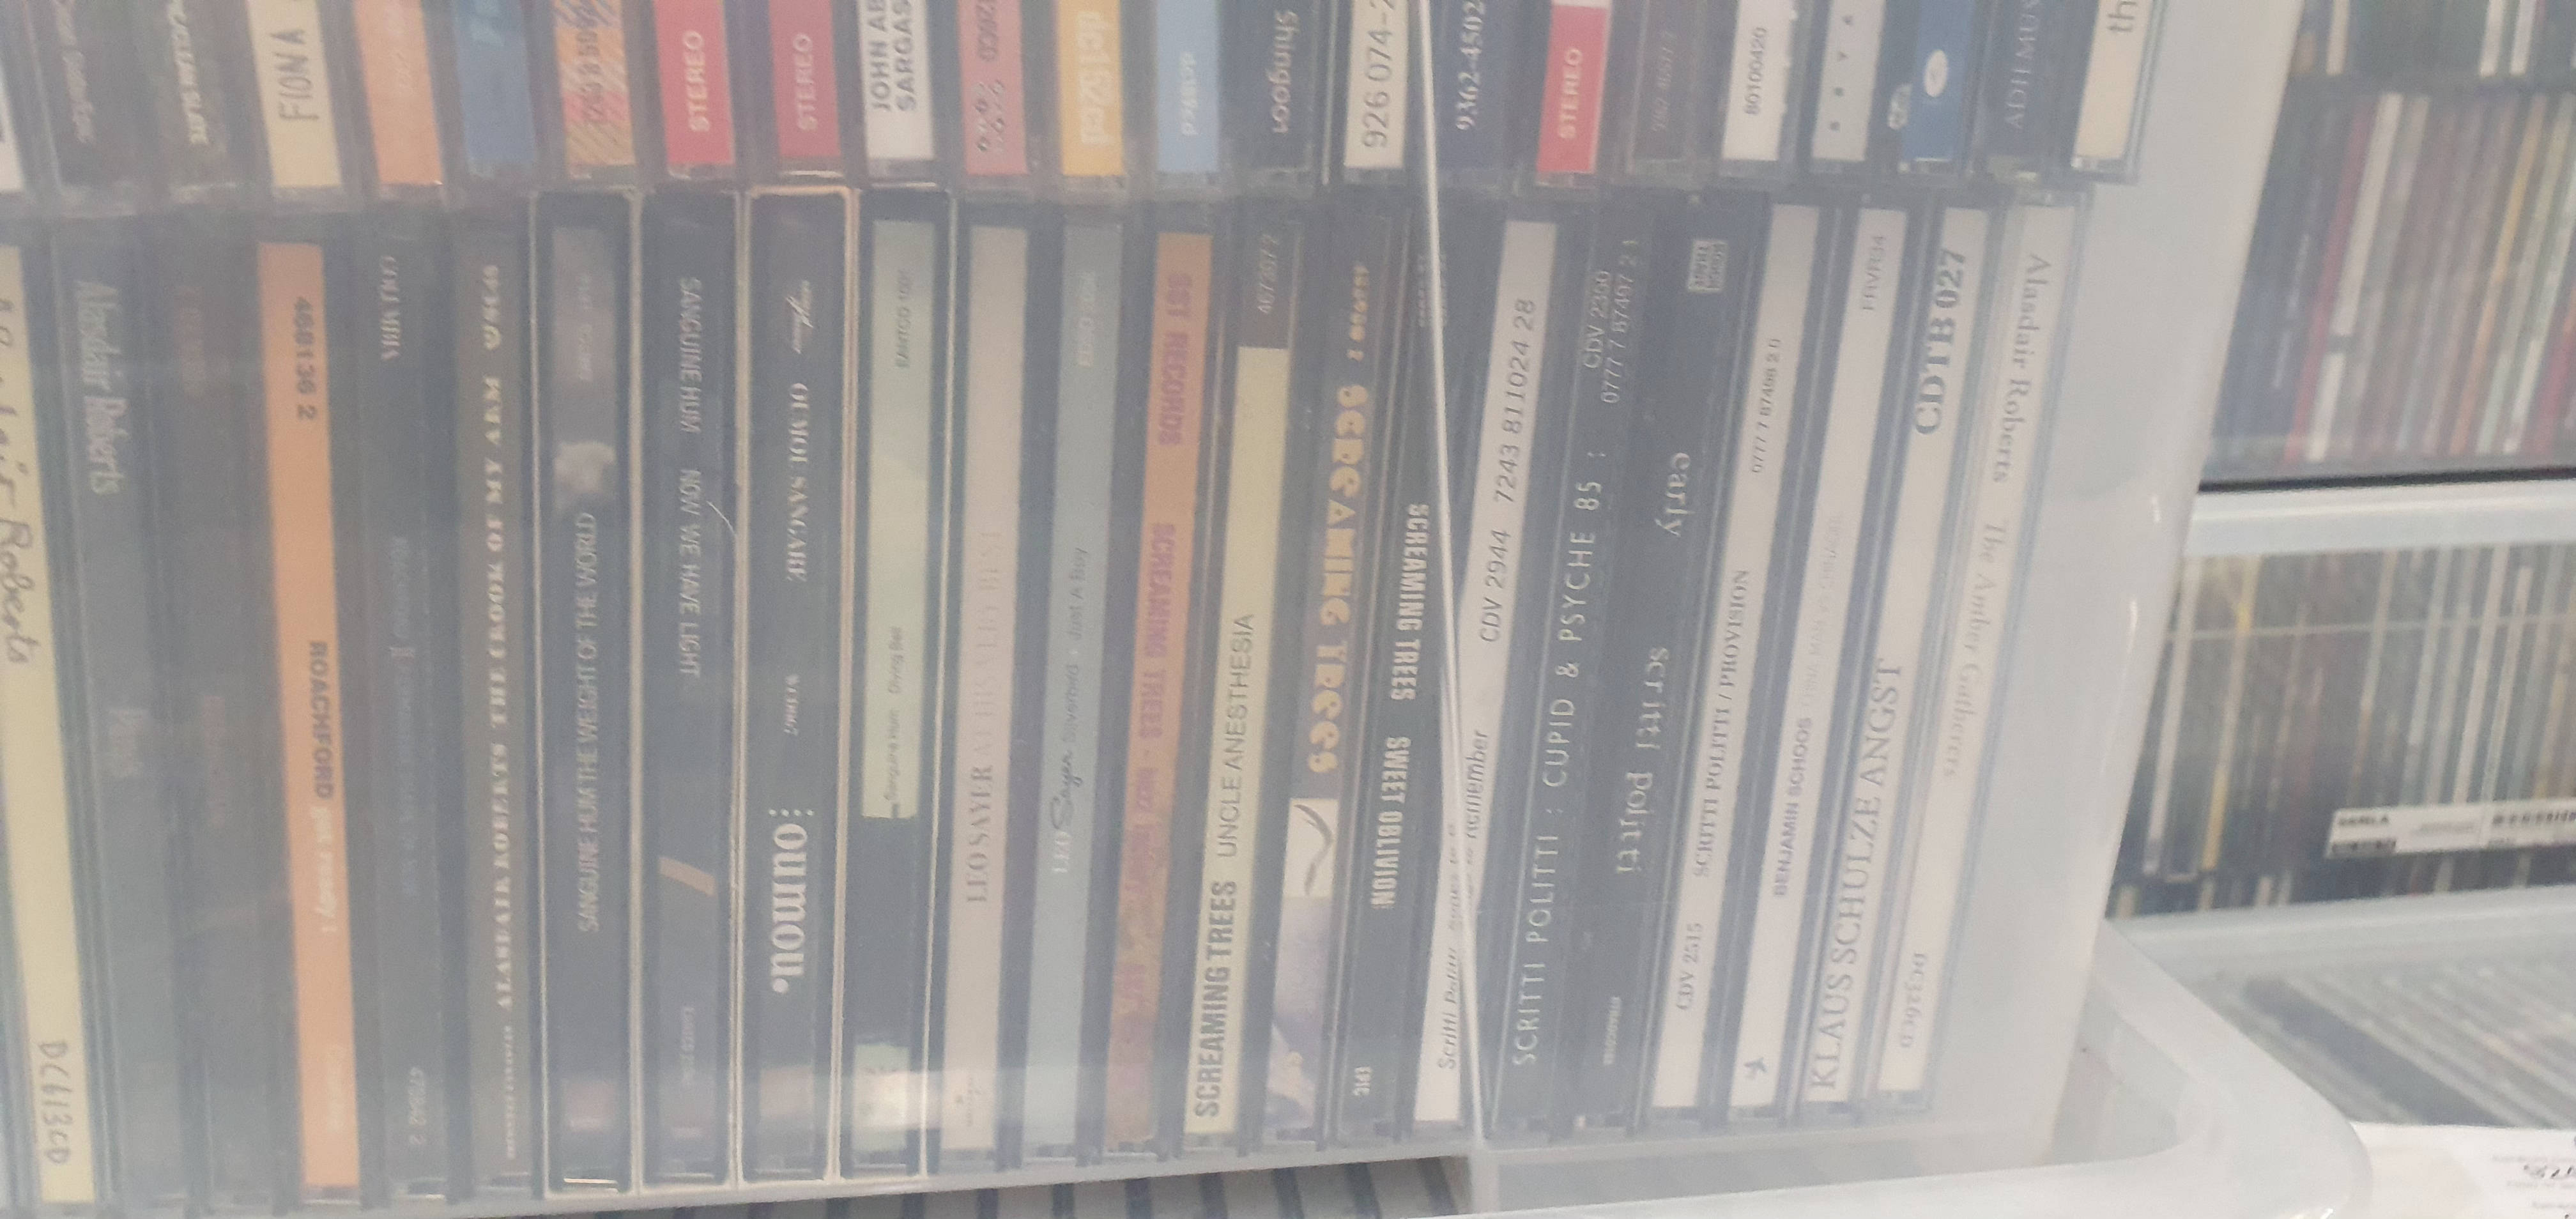 LARGE COLLECTION OF APPROXIMATELY 200 MUSIC CD'S - Image 5 of 9